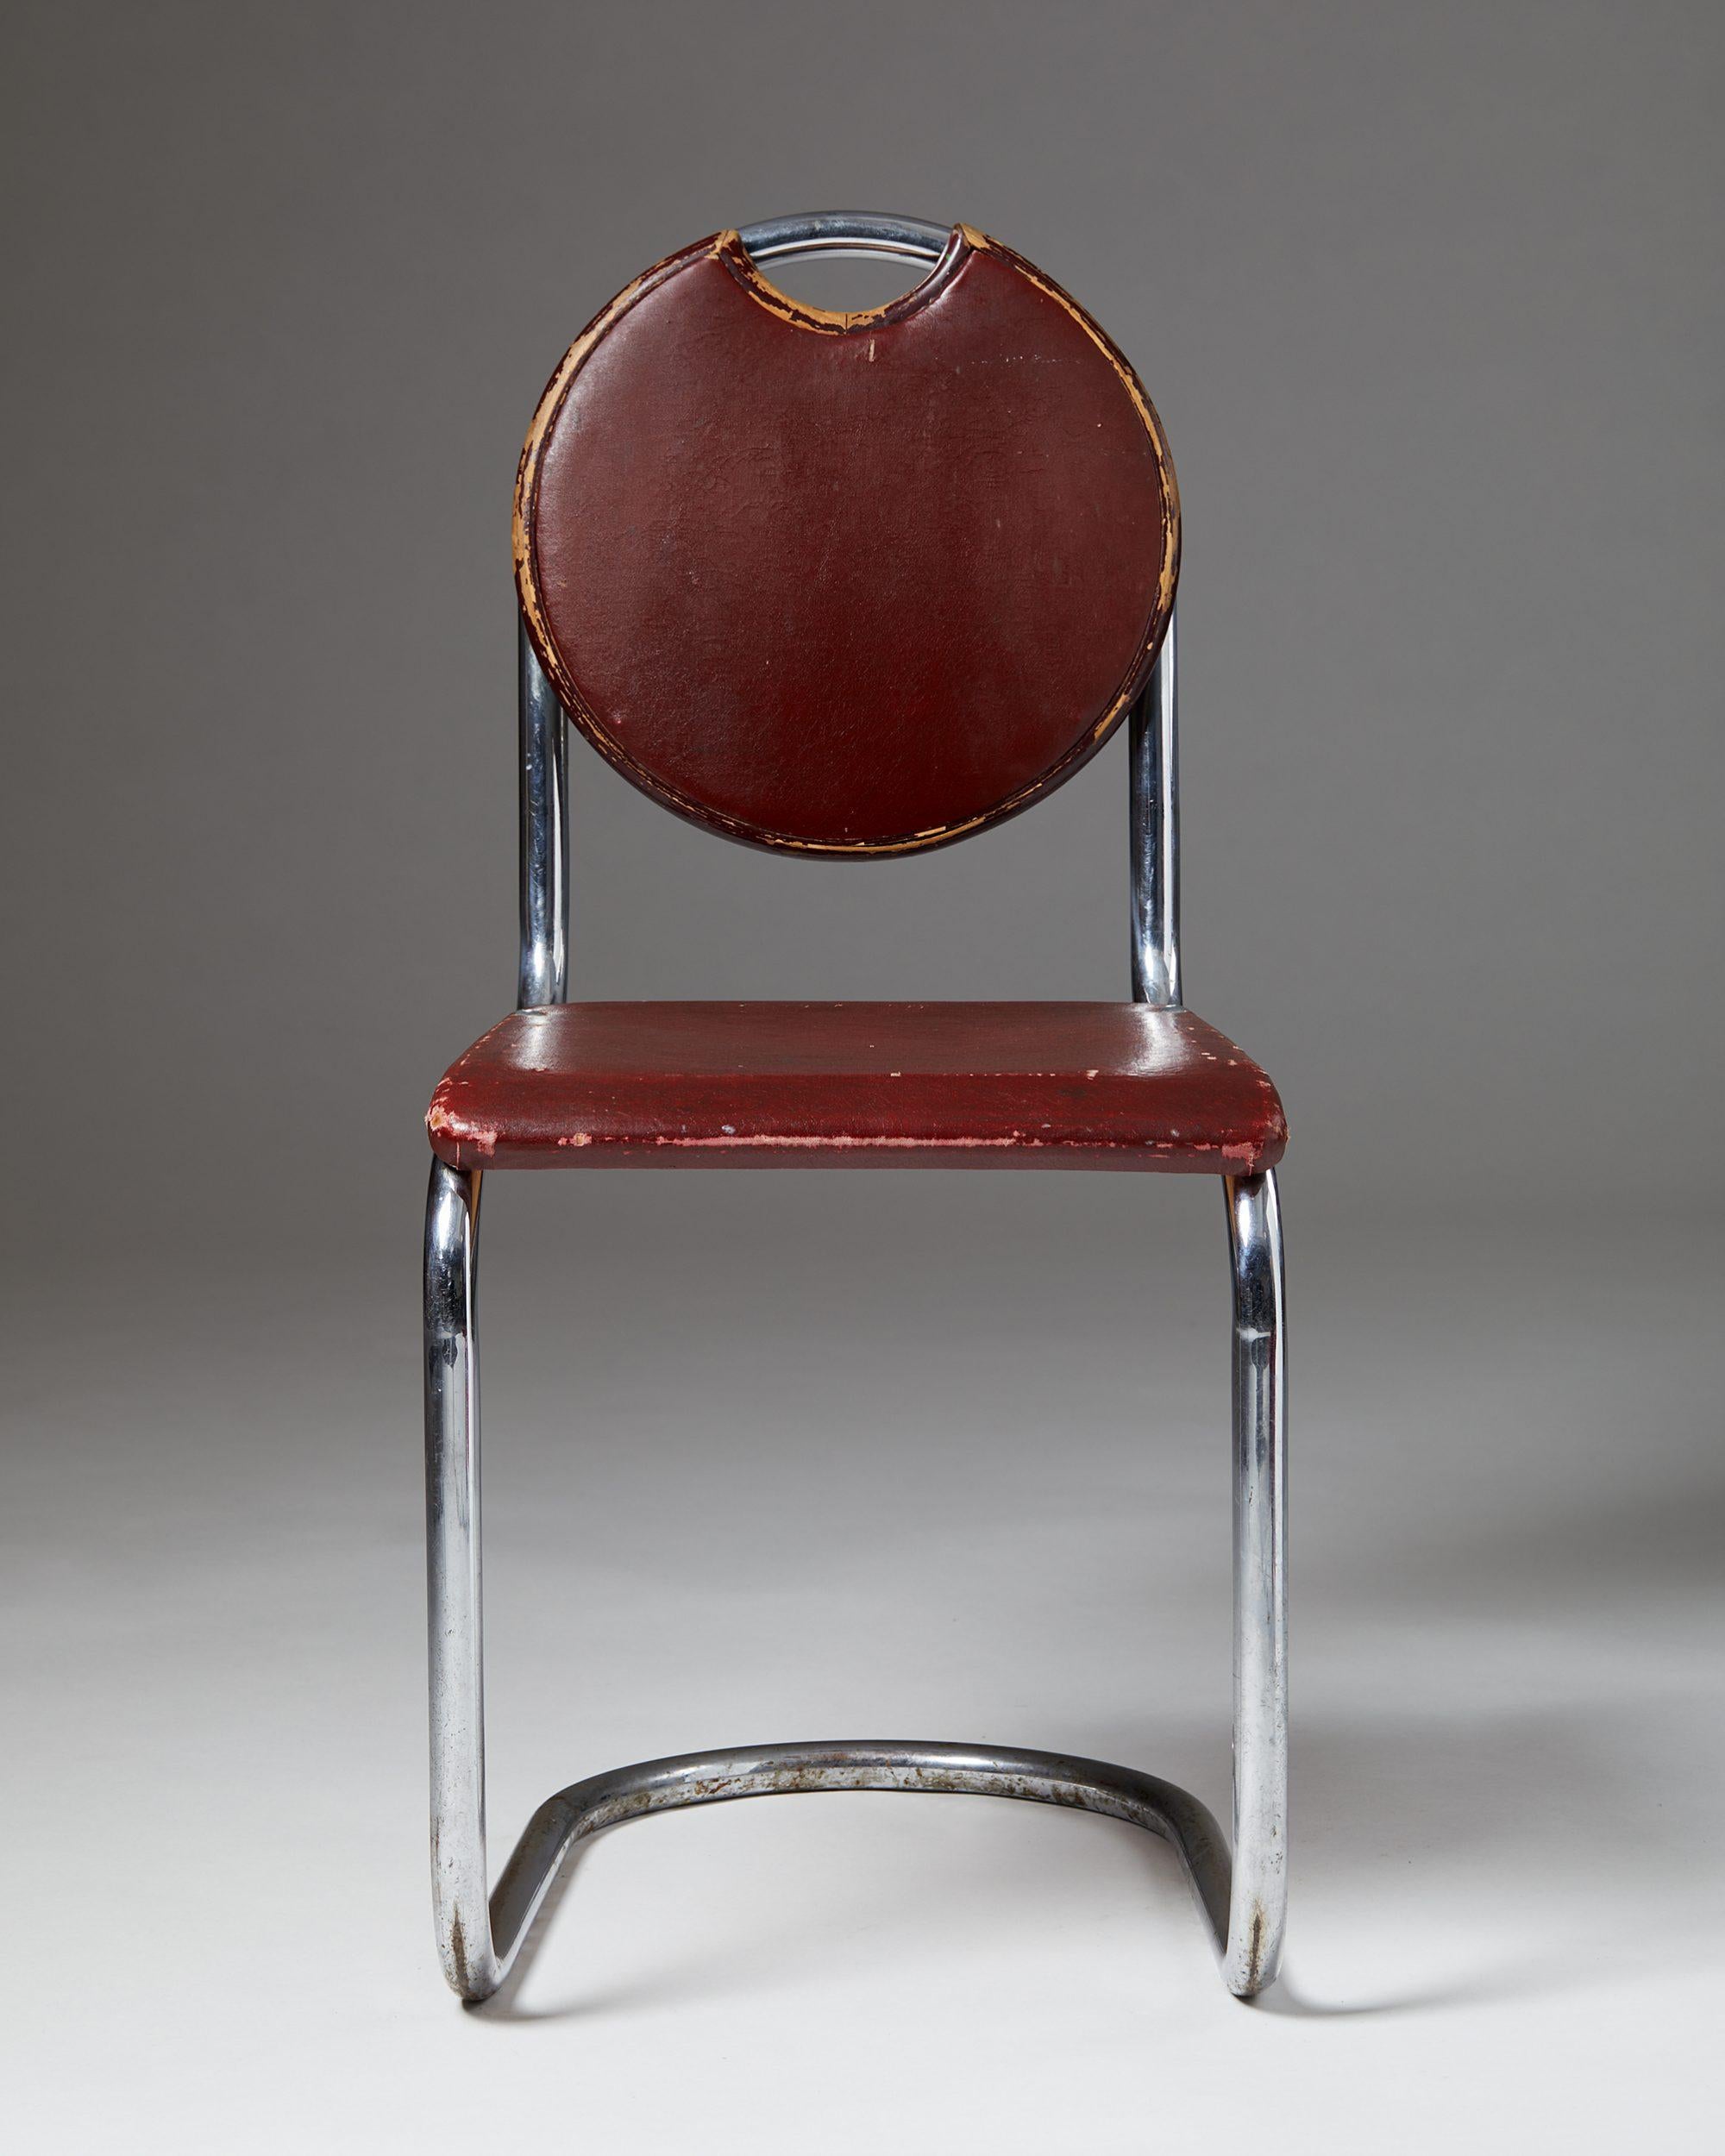 Steel Chair Designed by Sven Markelius for Ds-Staal, Sweden, 1930's